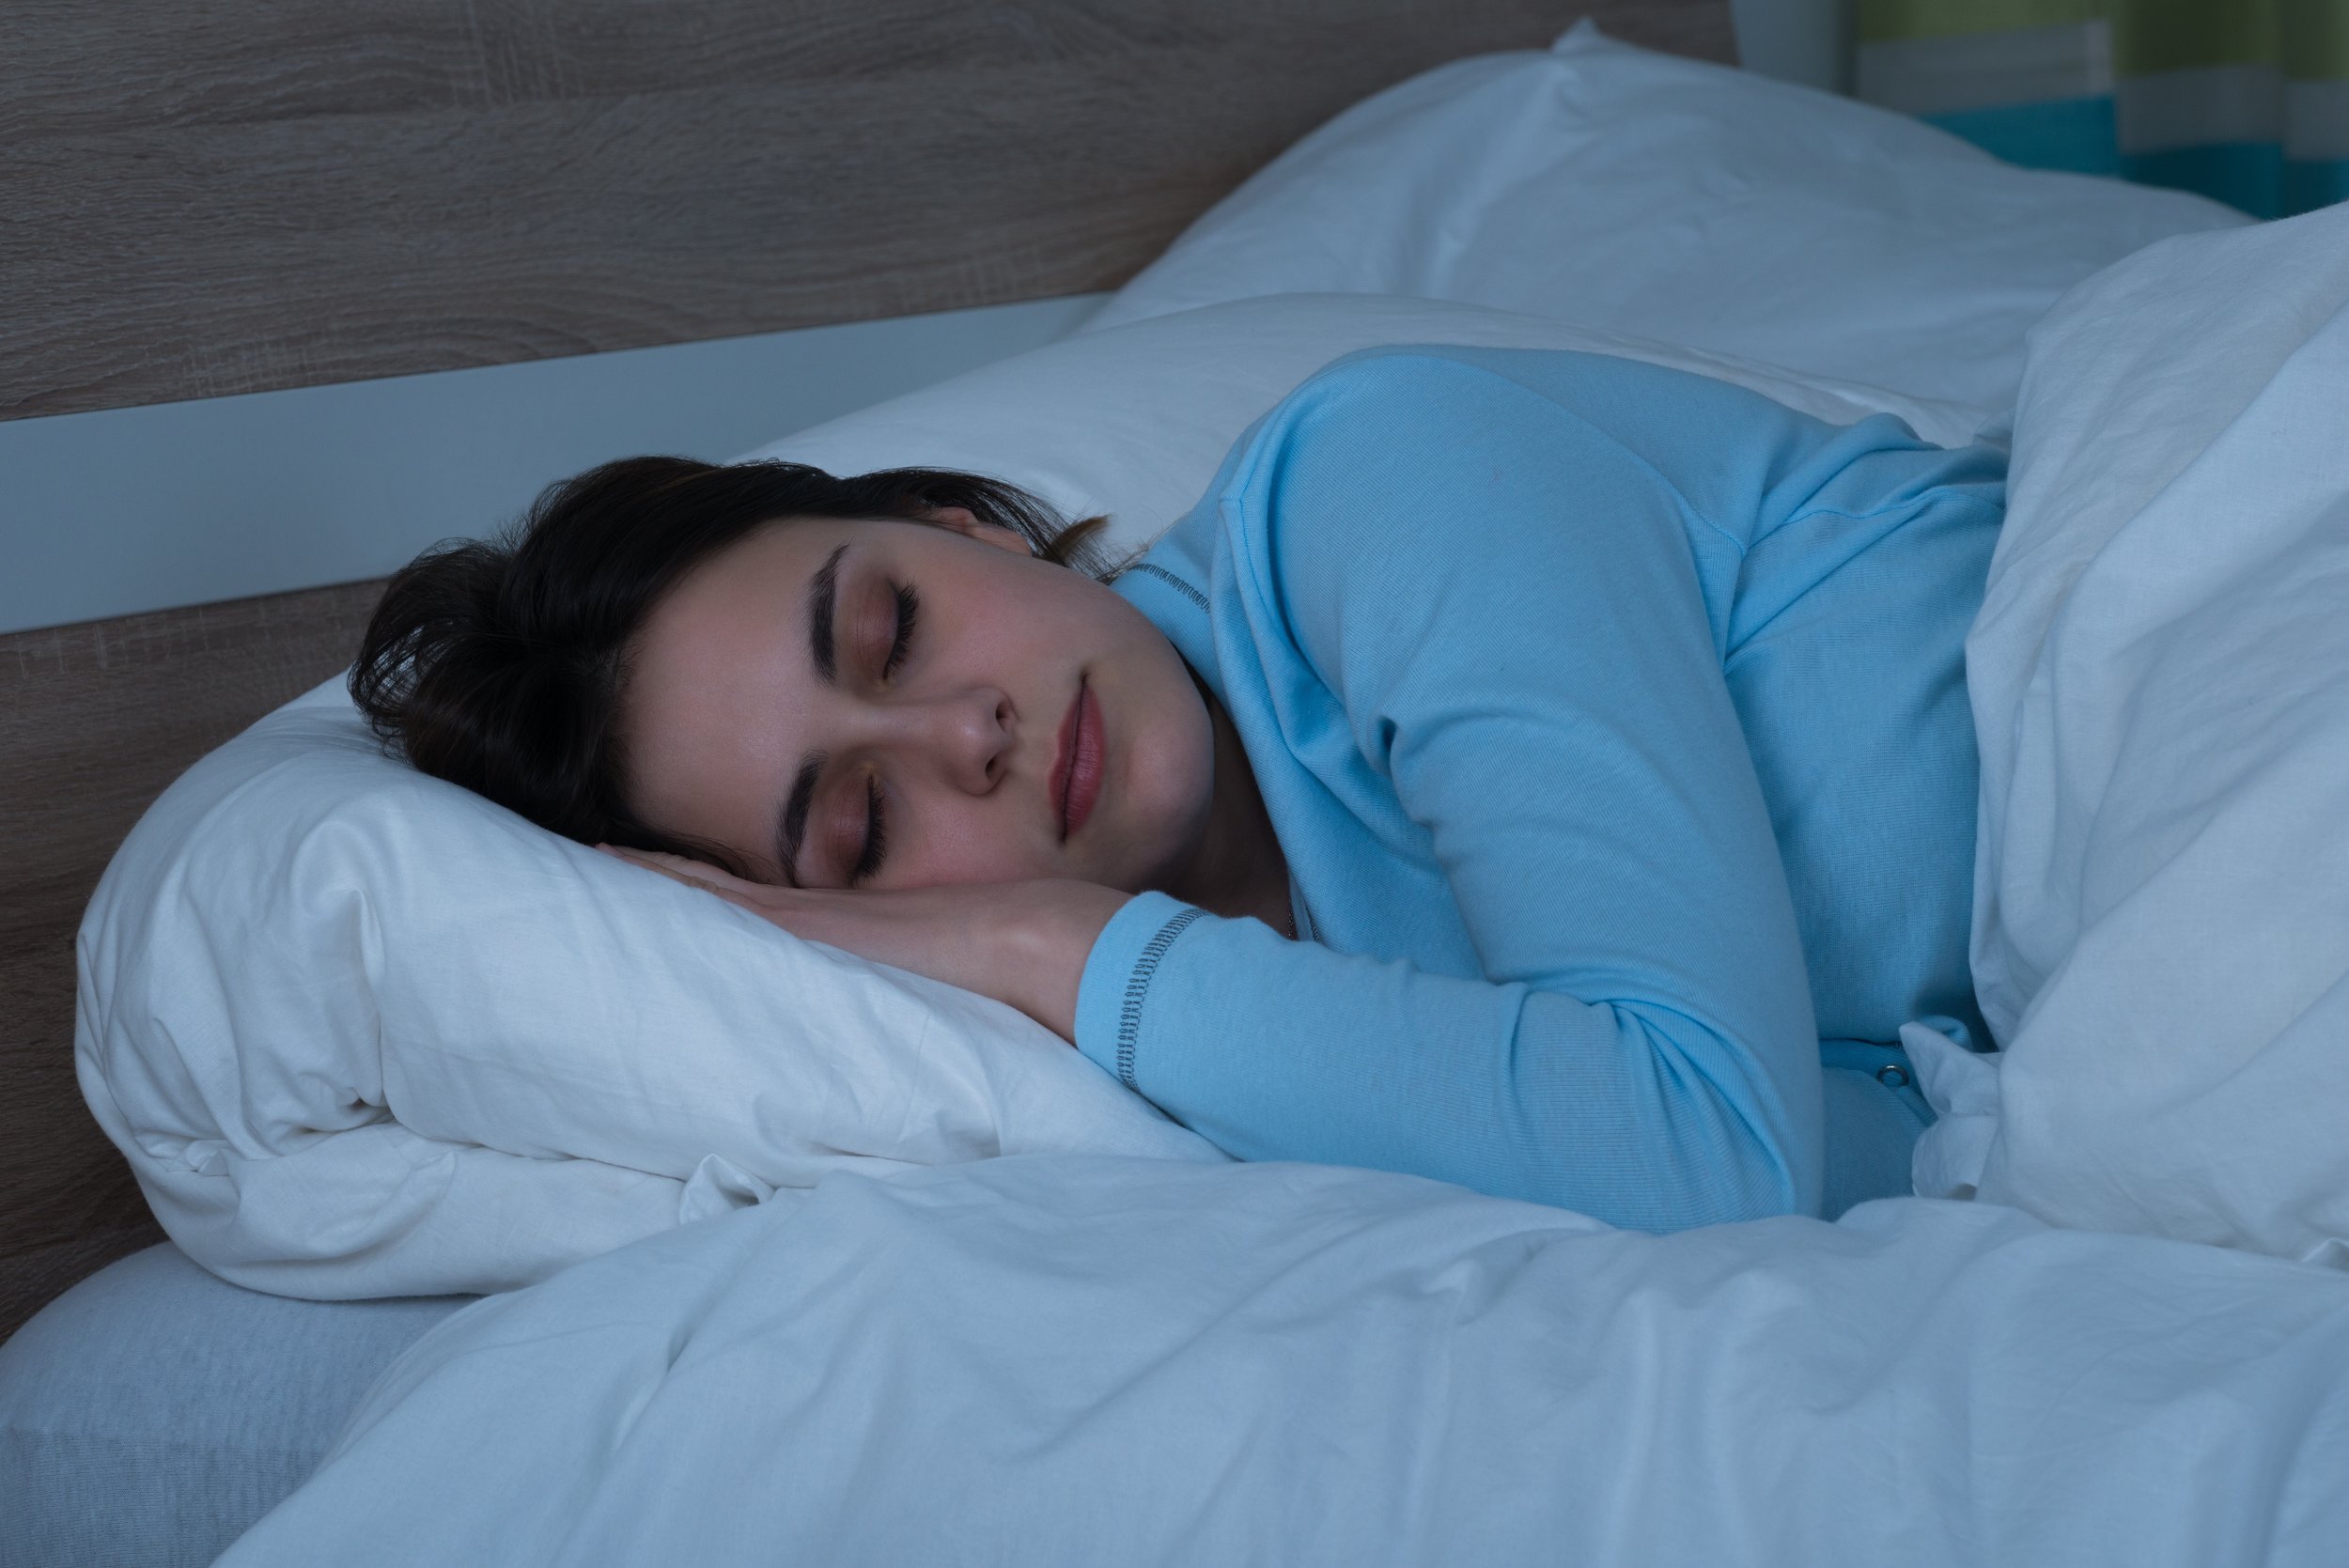 Sleep is an essential “nutrient” for reducing Lyme-induced neuroinflammation. Personally, improving my sleep hygiene and making time in my schedule to get a solid 7-8 hours of sleep every night has allowed me to make great strides in my recovery.